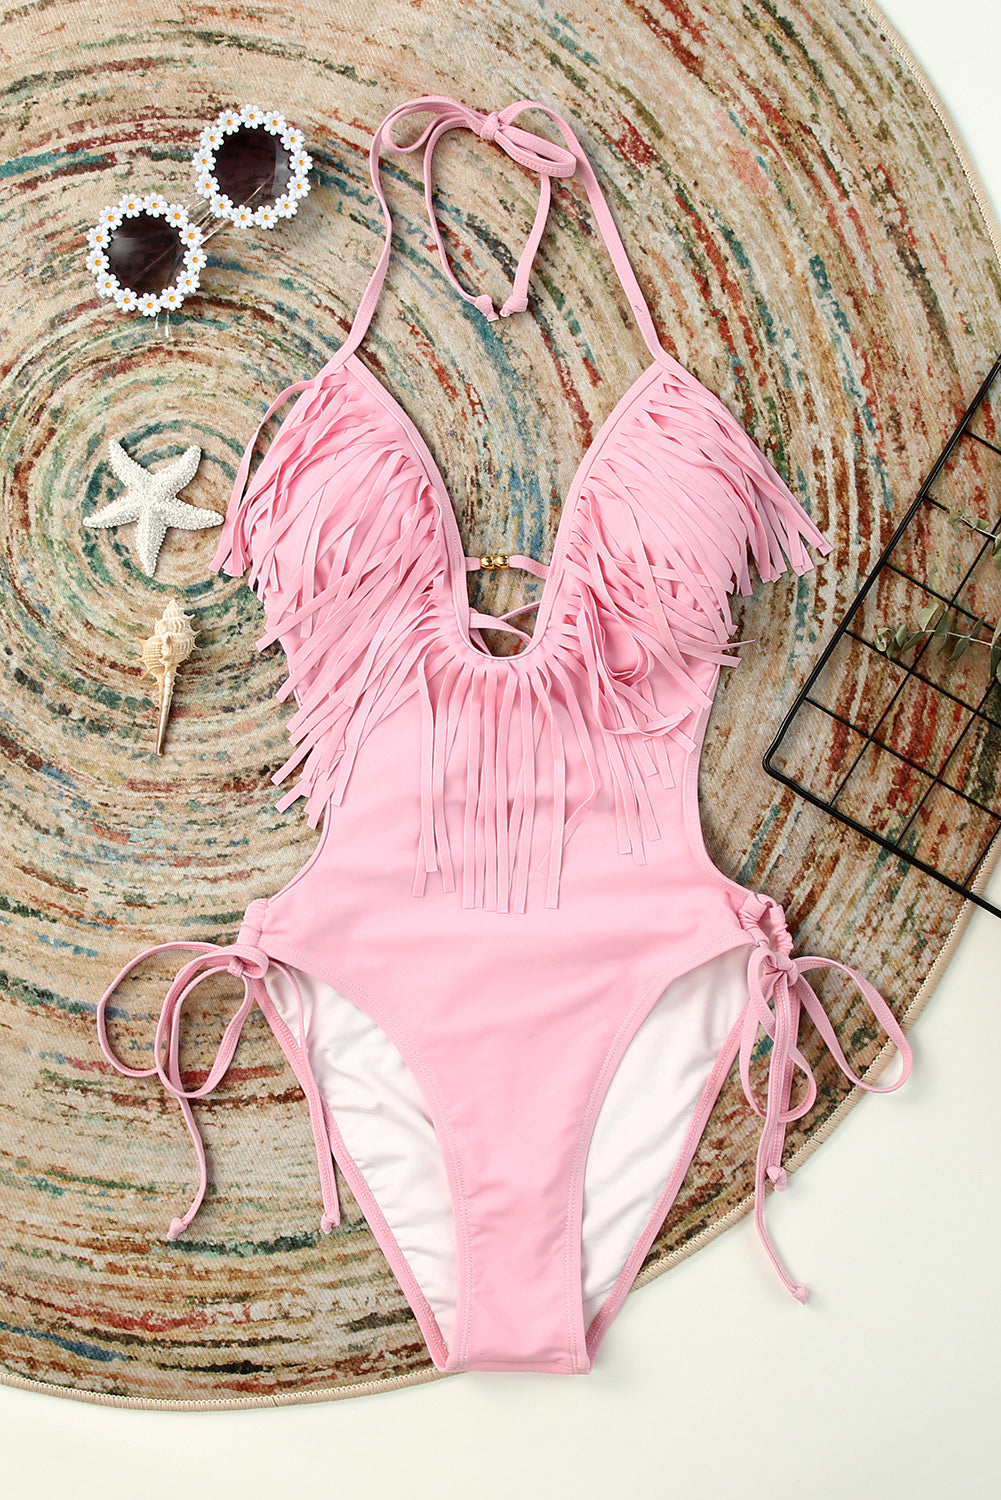 LC443432-10-S, LC443432-10-M, LC443432-10-L, LC443432-10-XL, LC443432-10-2XL, Pink Tassel One Piece Swimsuits for Women Halter Backless Sexy Swimwear